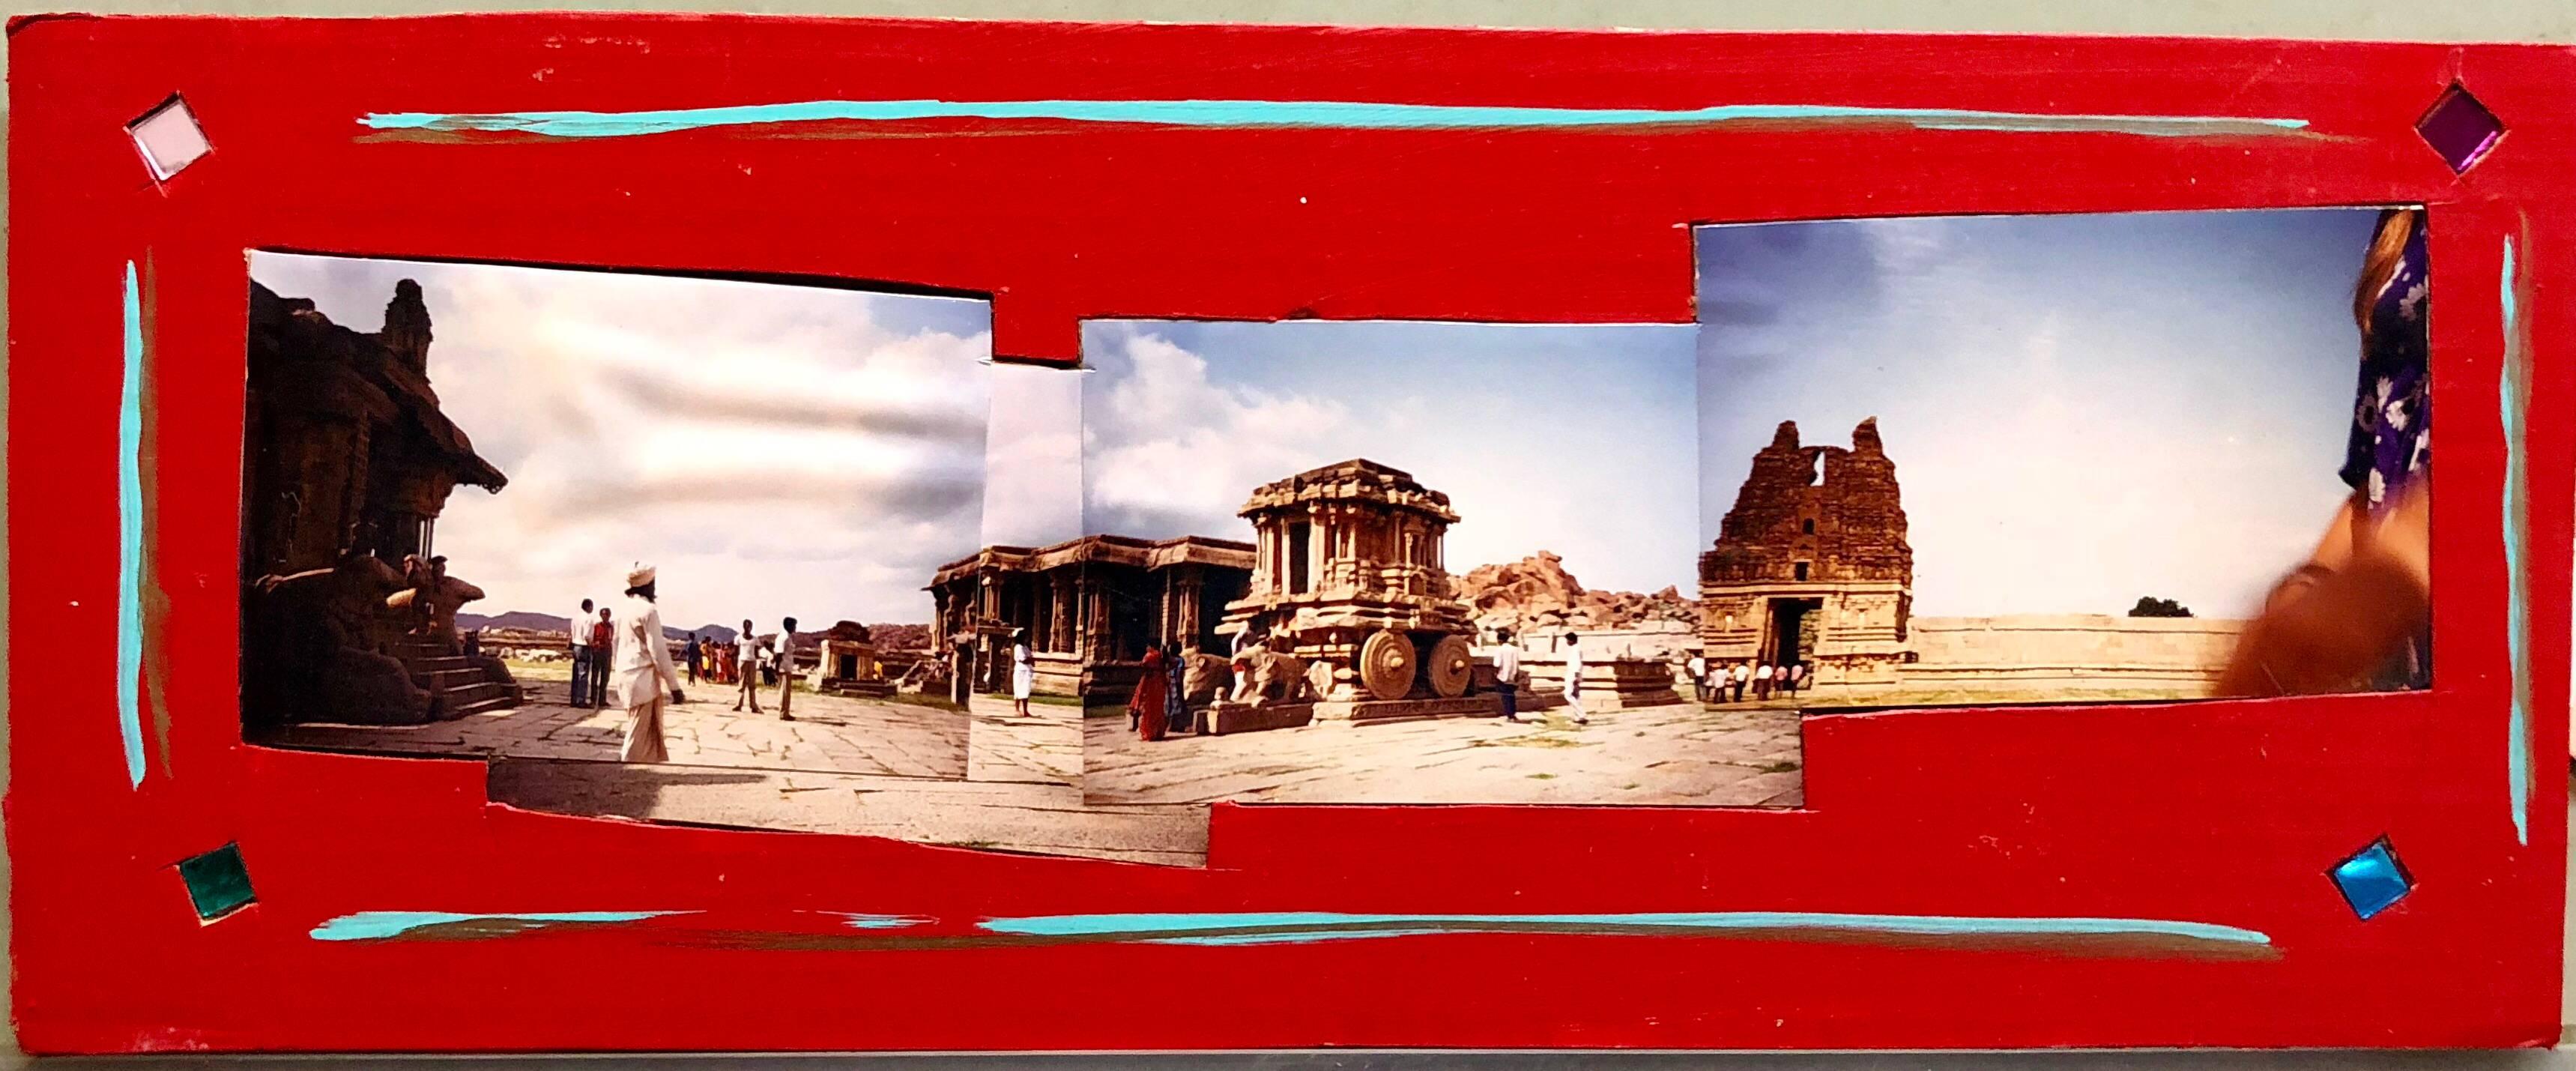 Tourists Hampi, India, 1992, Photo Prints on Cardboard, Collage, Mirror Insets For Sale 3